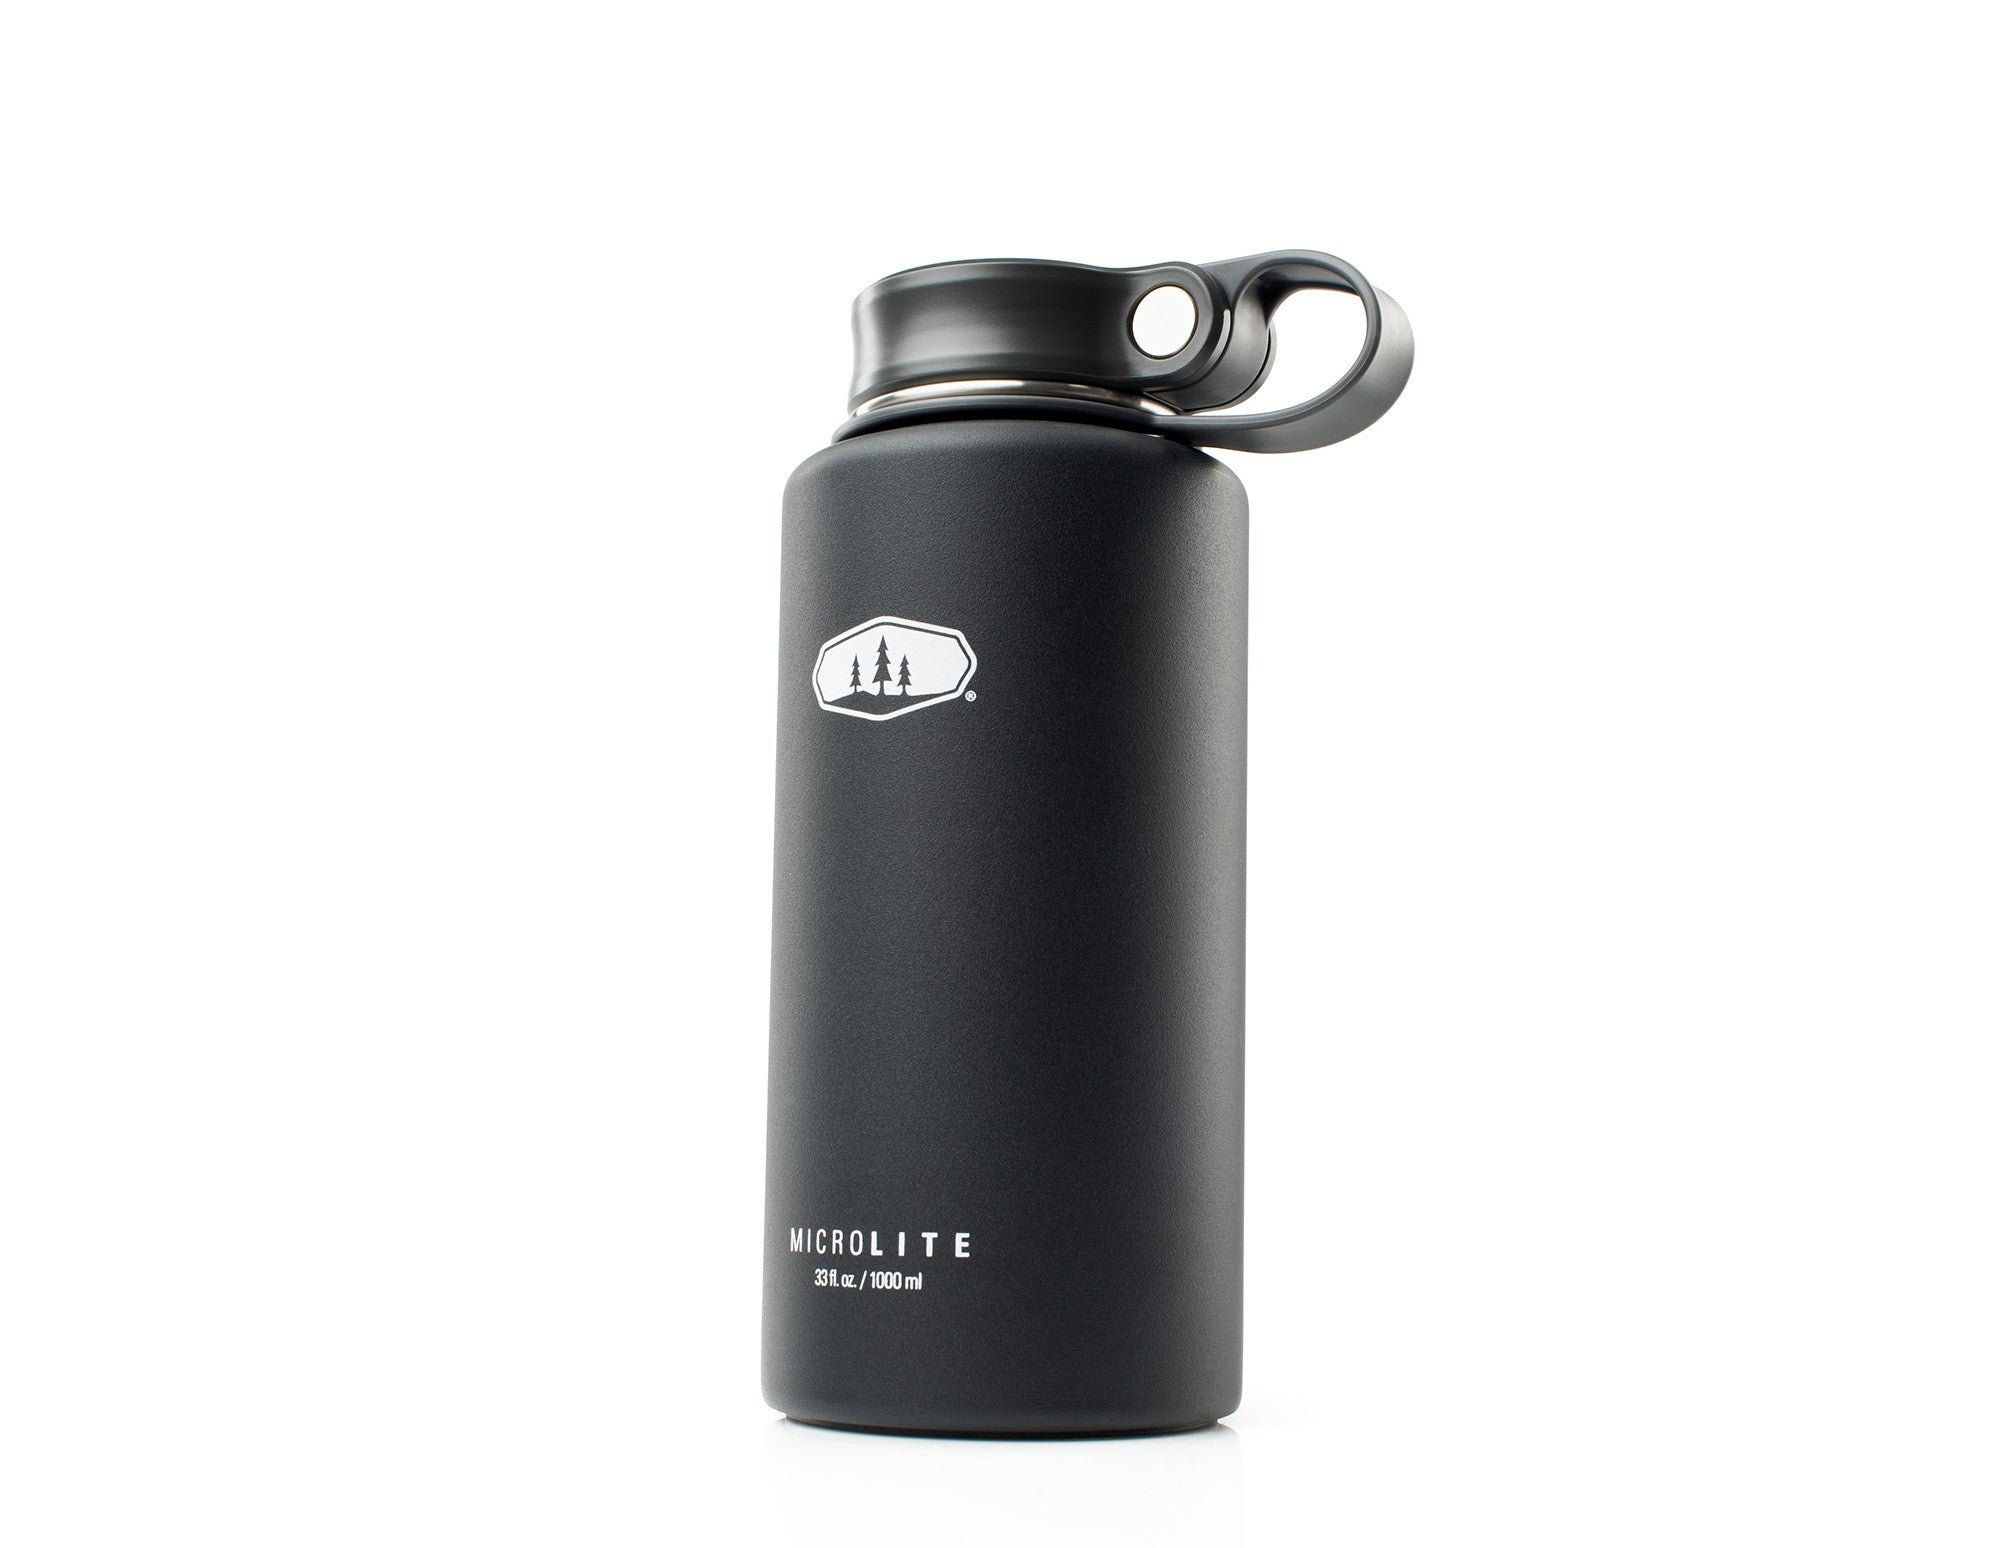 Double Wall Stainless Steel Frequency Water Bottle - Small